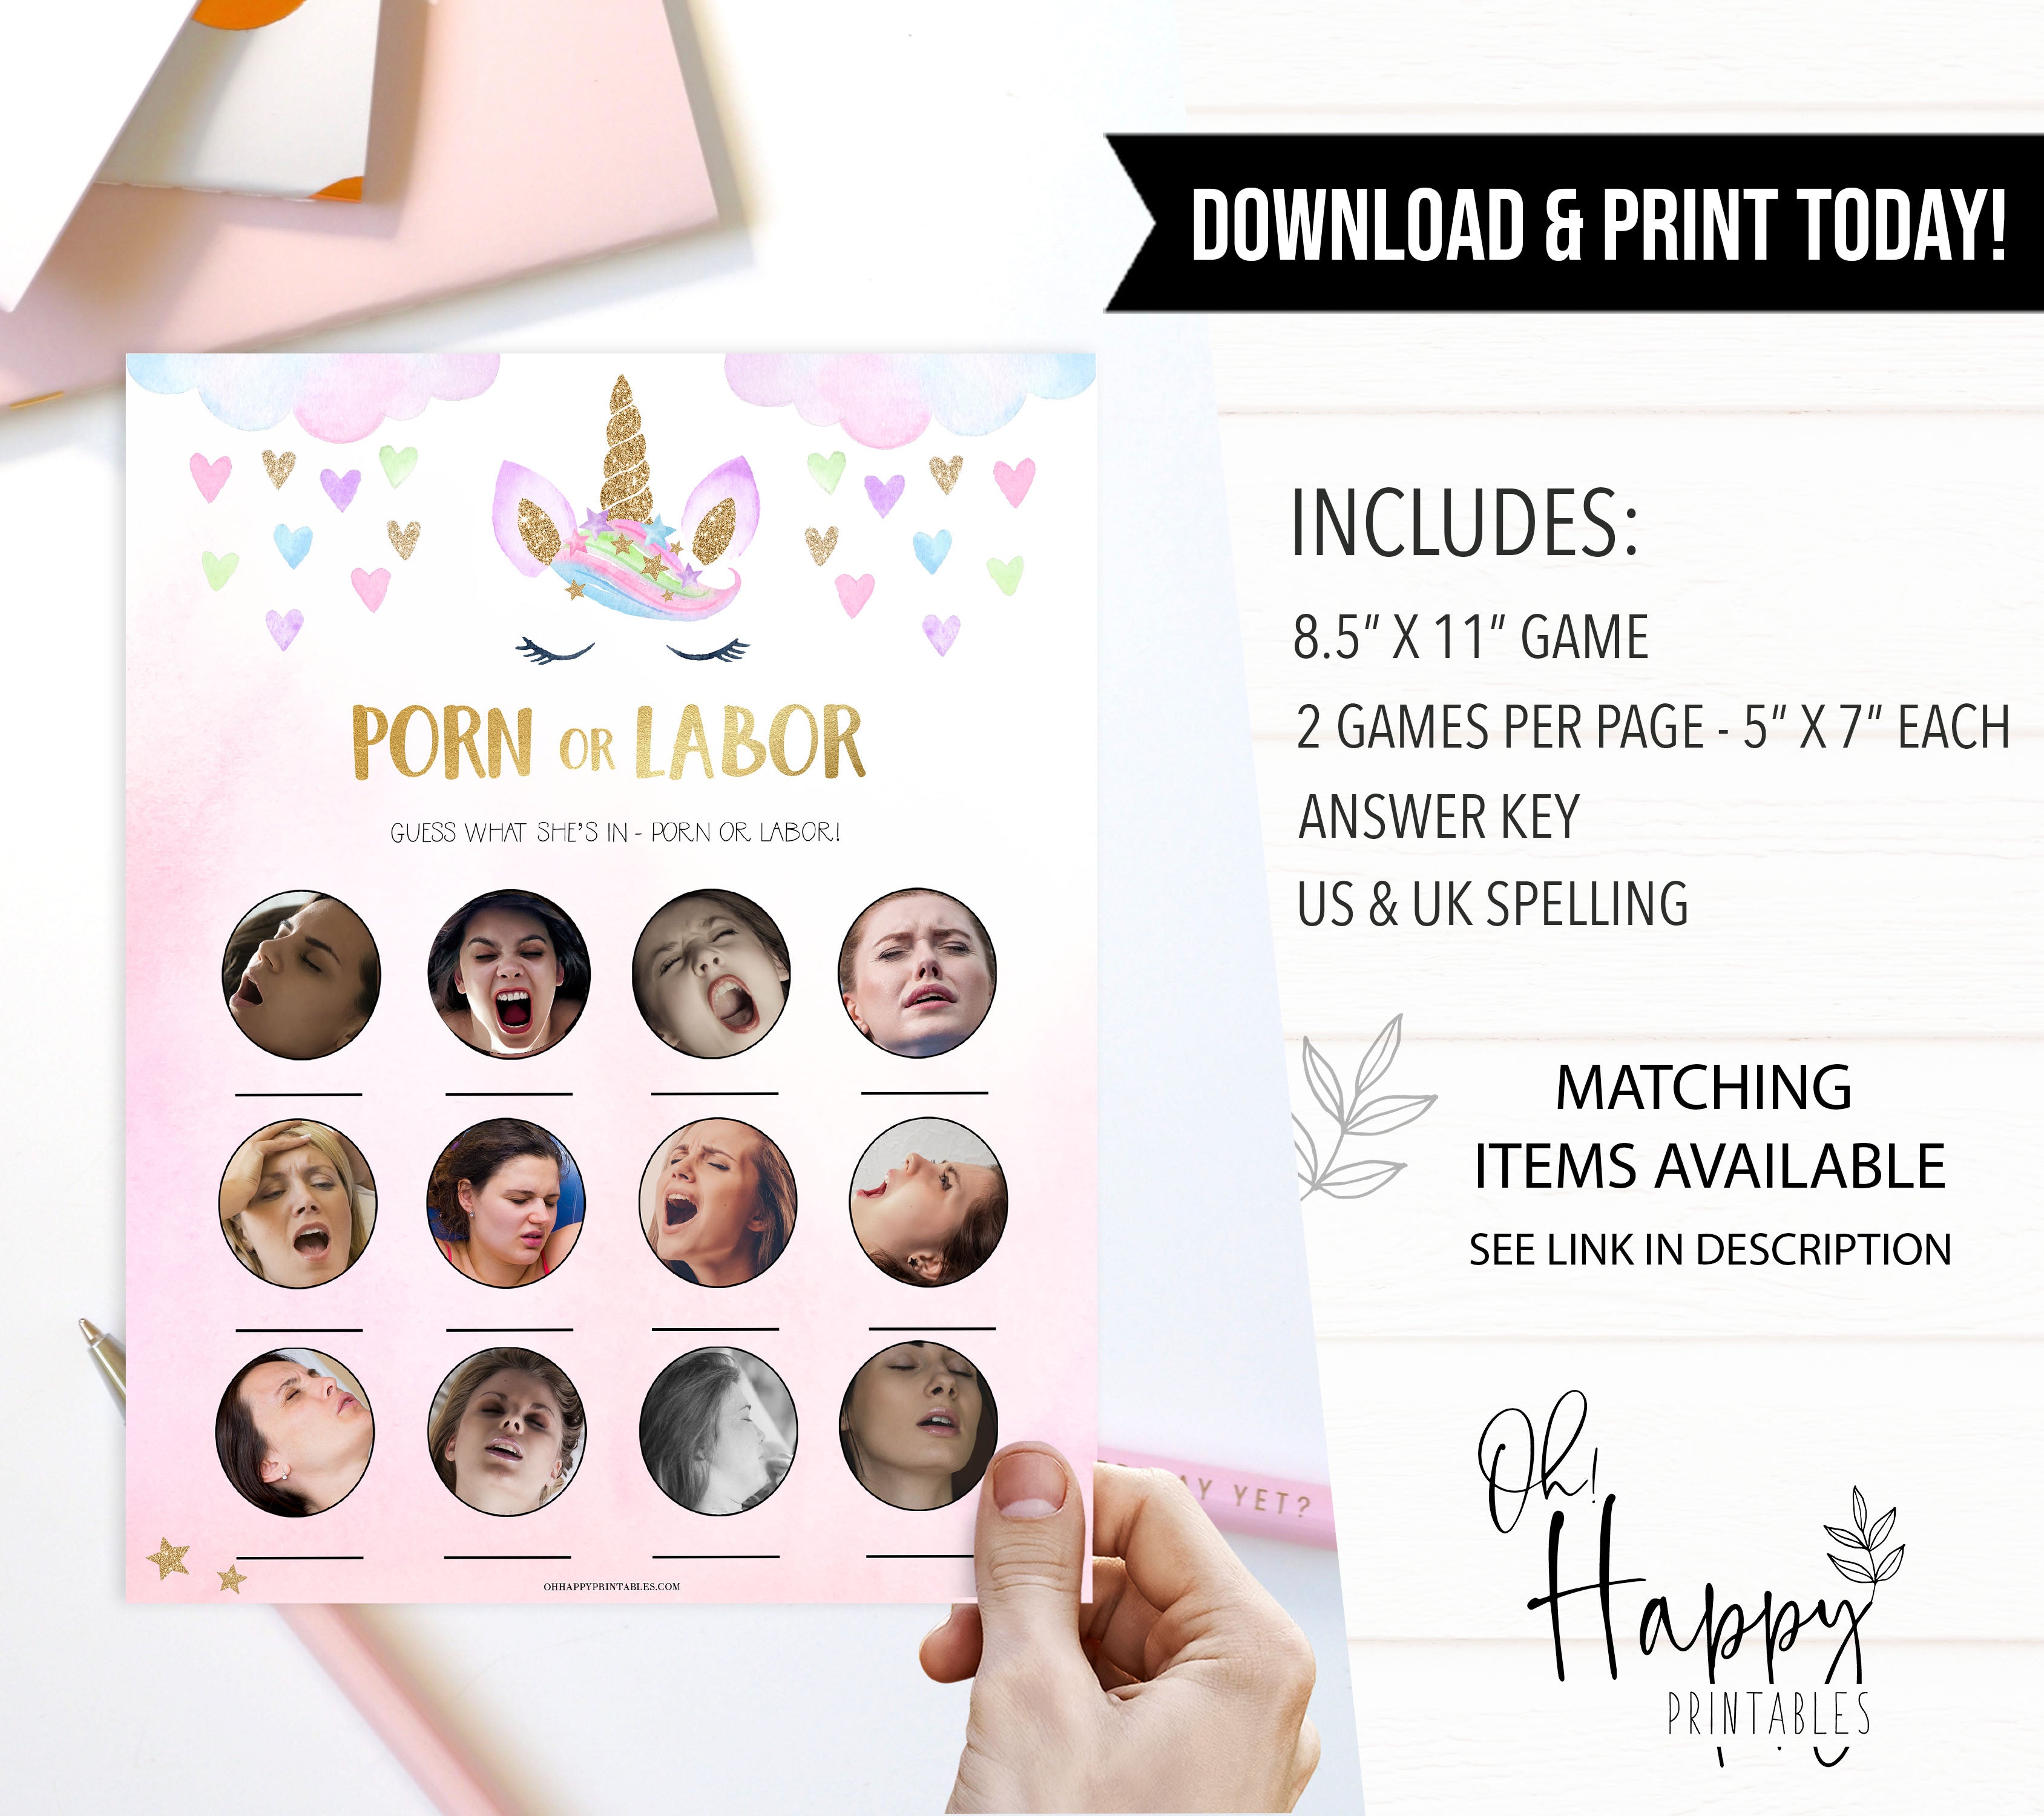 porn or labor baby shower games, Printable baby shower games, unicorn baby games, baby shower games, fun baby shower ideas, top baby shower ideas, unicorn baby shower, baby shower games, fun unicorn baby shower ideas